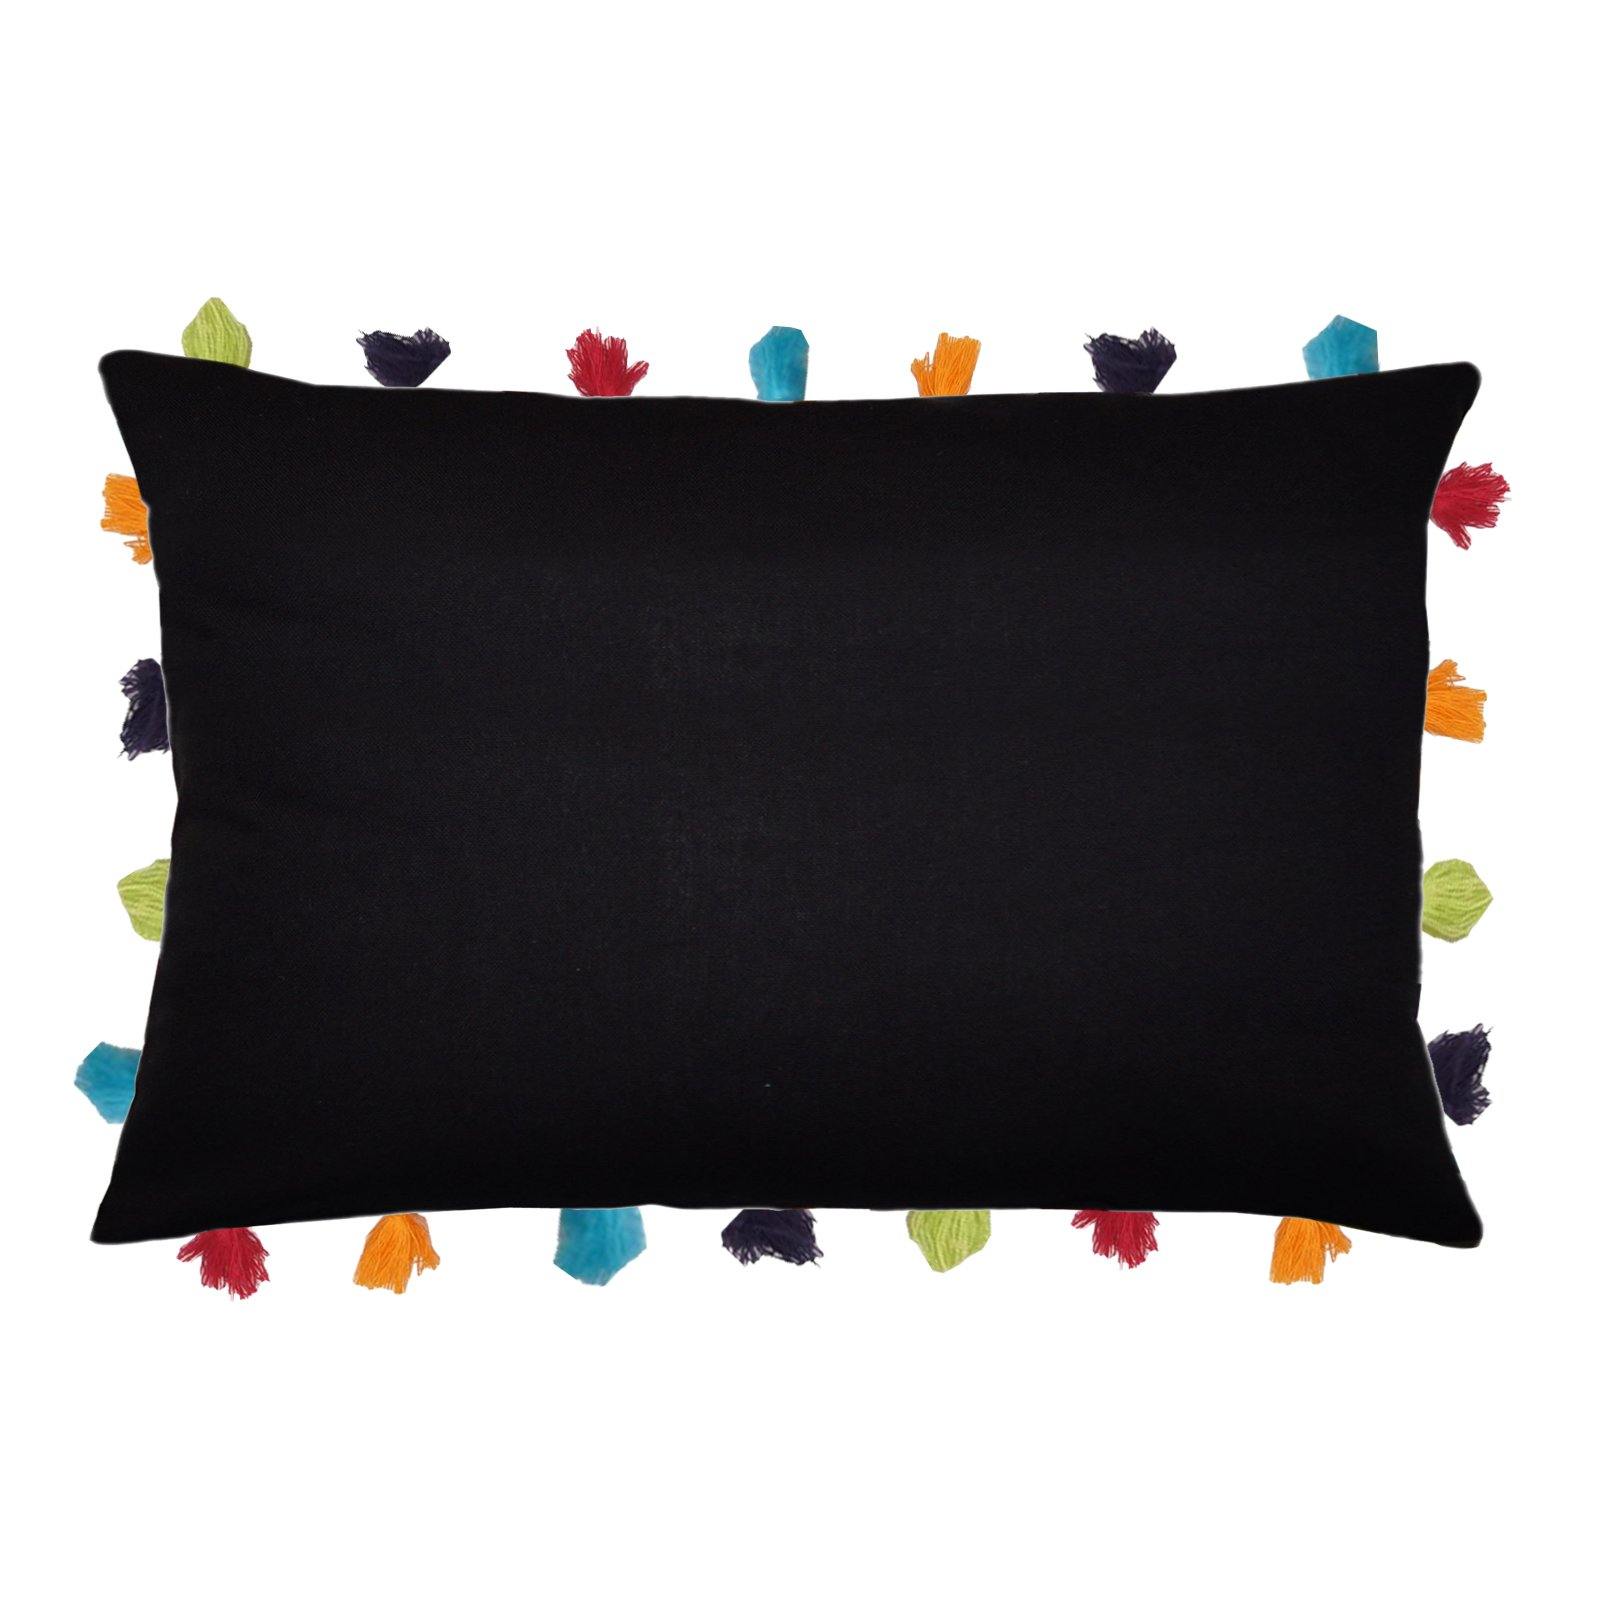 Lushomes Pirate Black Cushion Cover with Colorful tassels (Single pc, 14 x 20”) - Lushomes